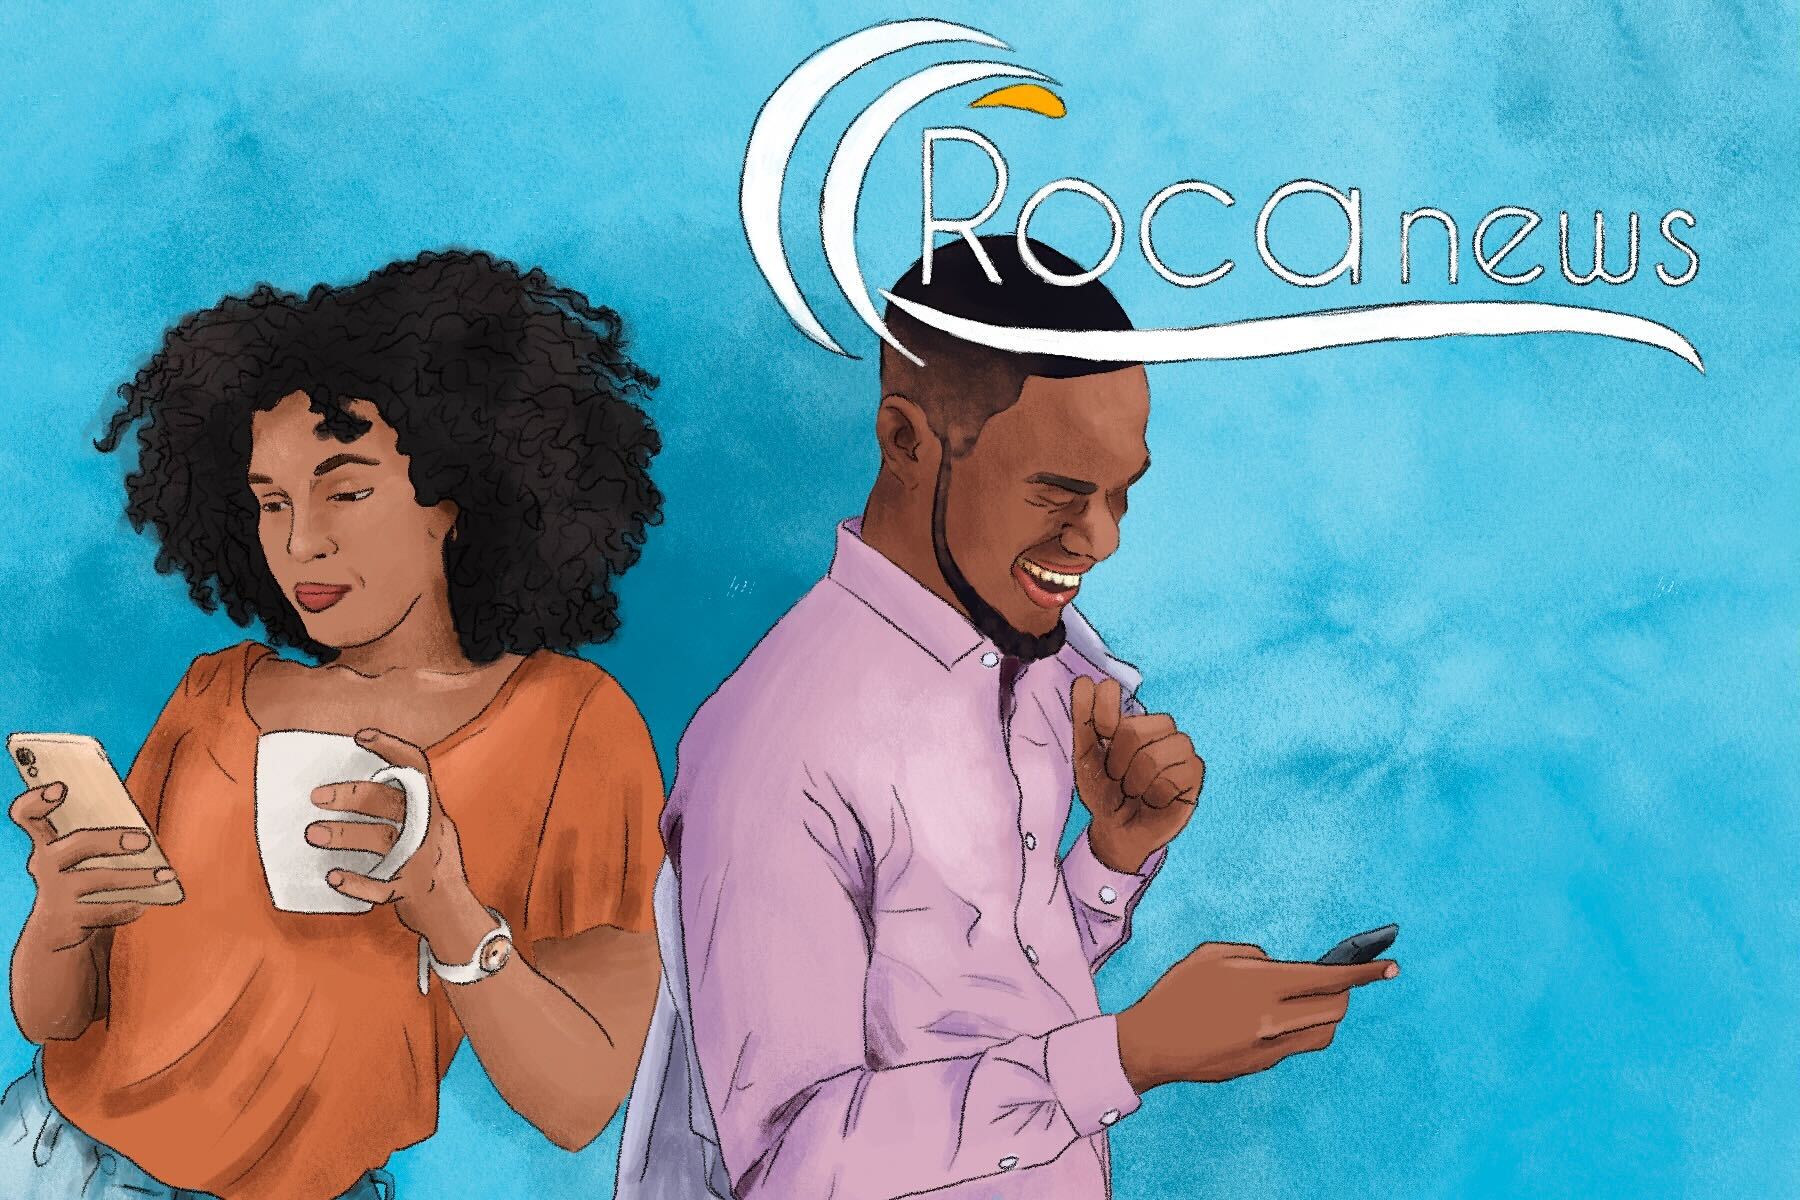 Illustration of the RocaNews logo with two people checking their phones for the news